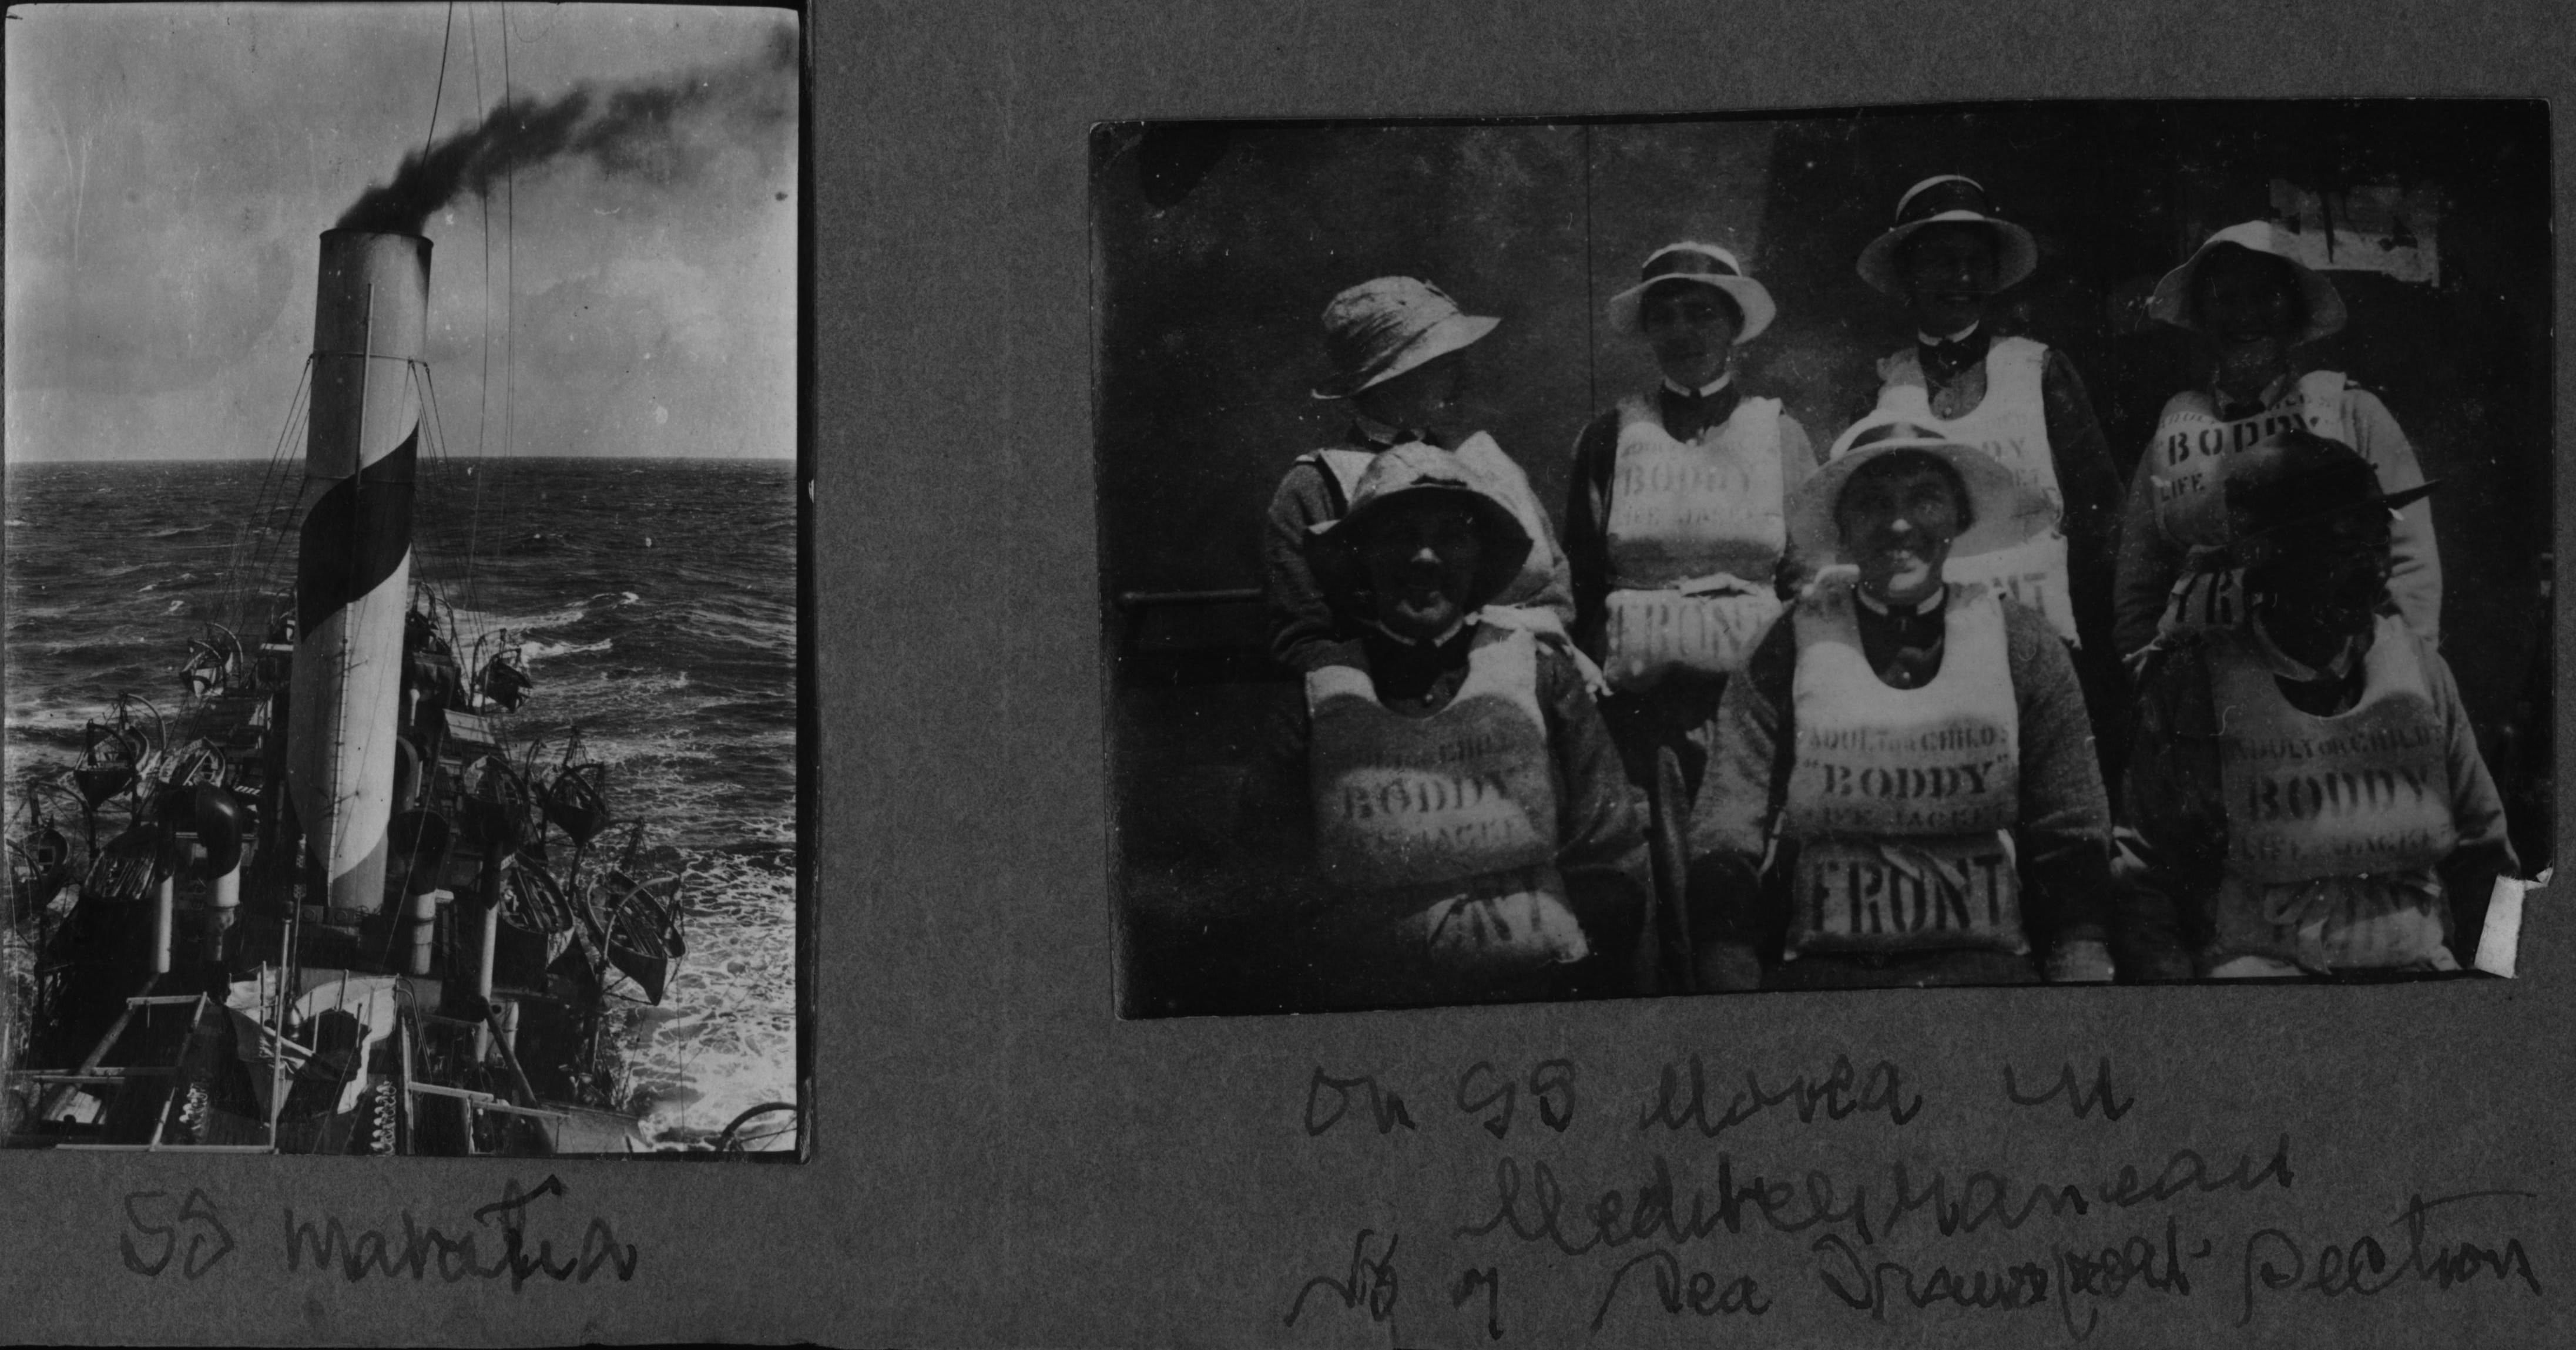 NURSES WITH RARE LIFE JACKETS  VERY UNUSUAL ACTUALLY PHOTO IS ON BOARDS SS MOREA AFTER THE WAR 